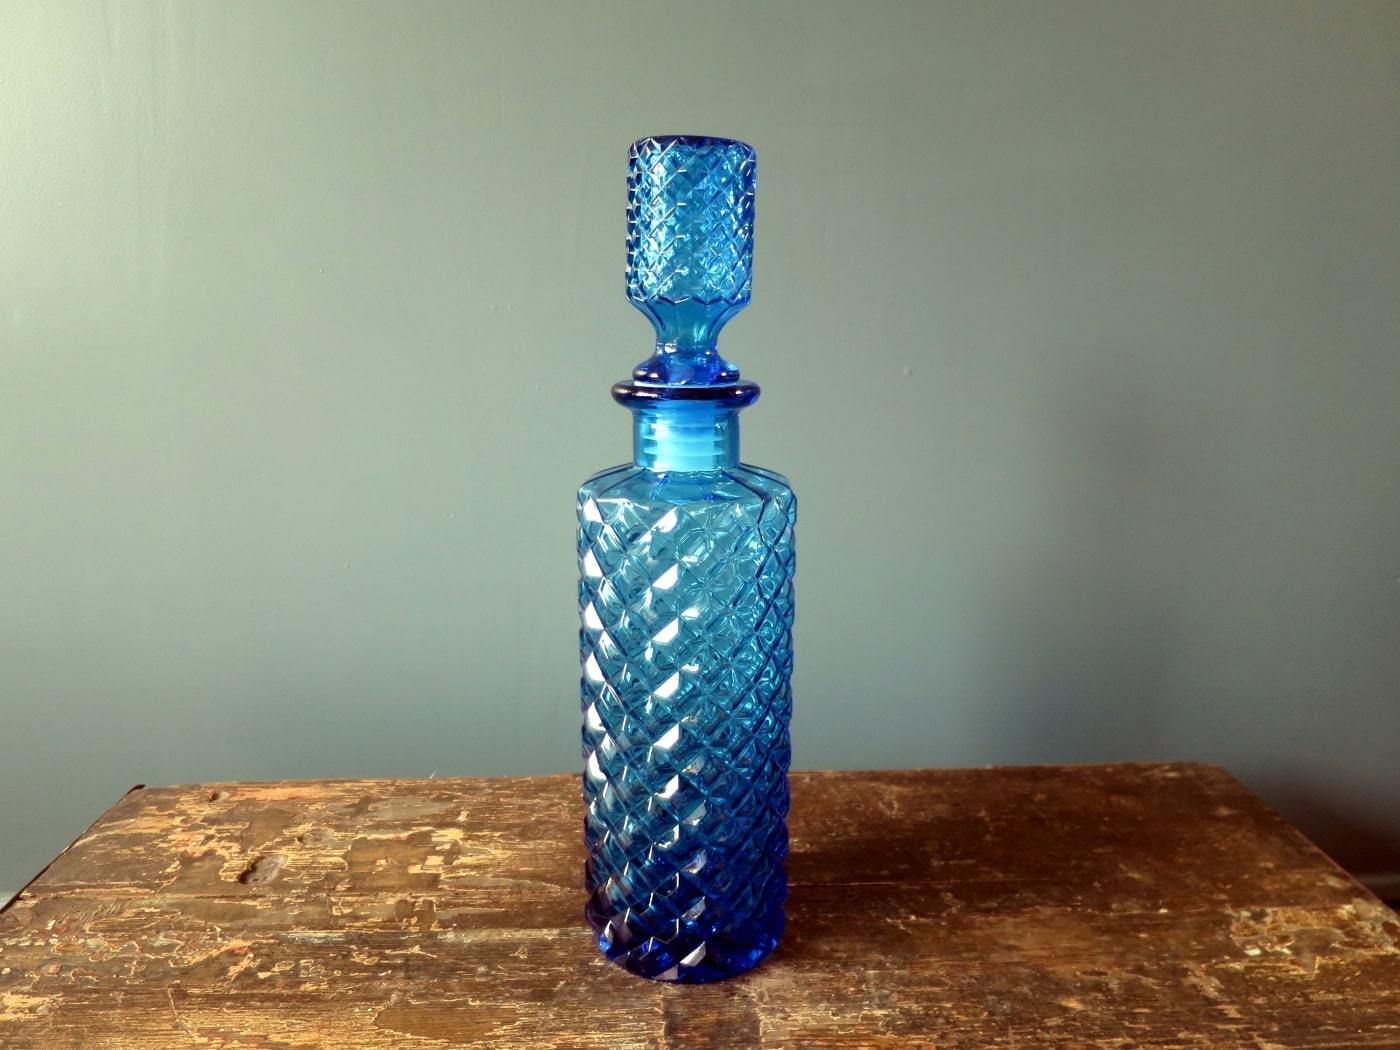 Rossini genie bottle decanter in Empoli glass with stopper in blue harlequin pattern